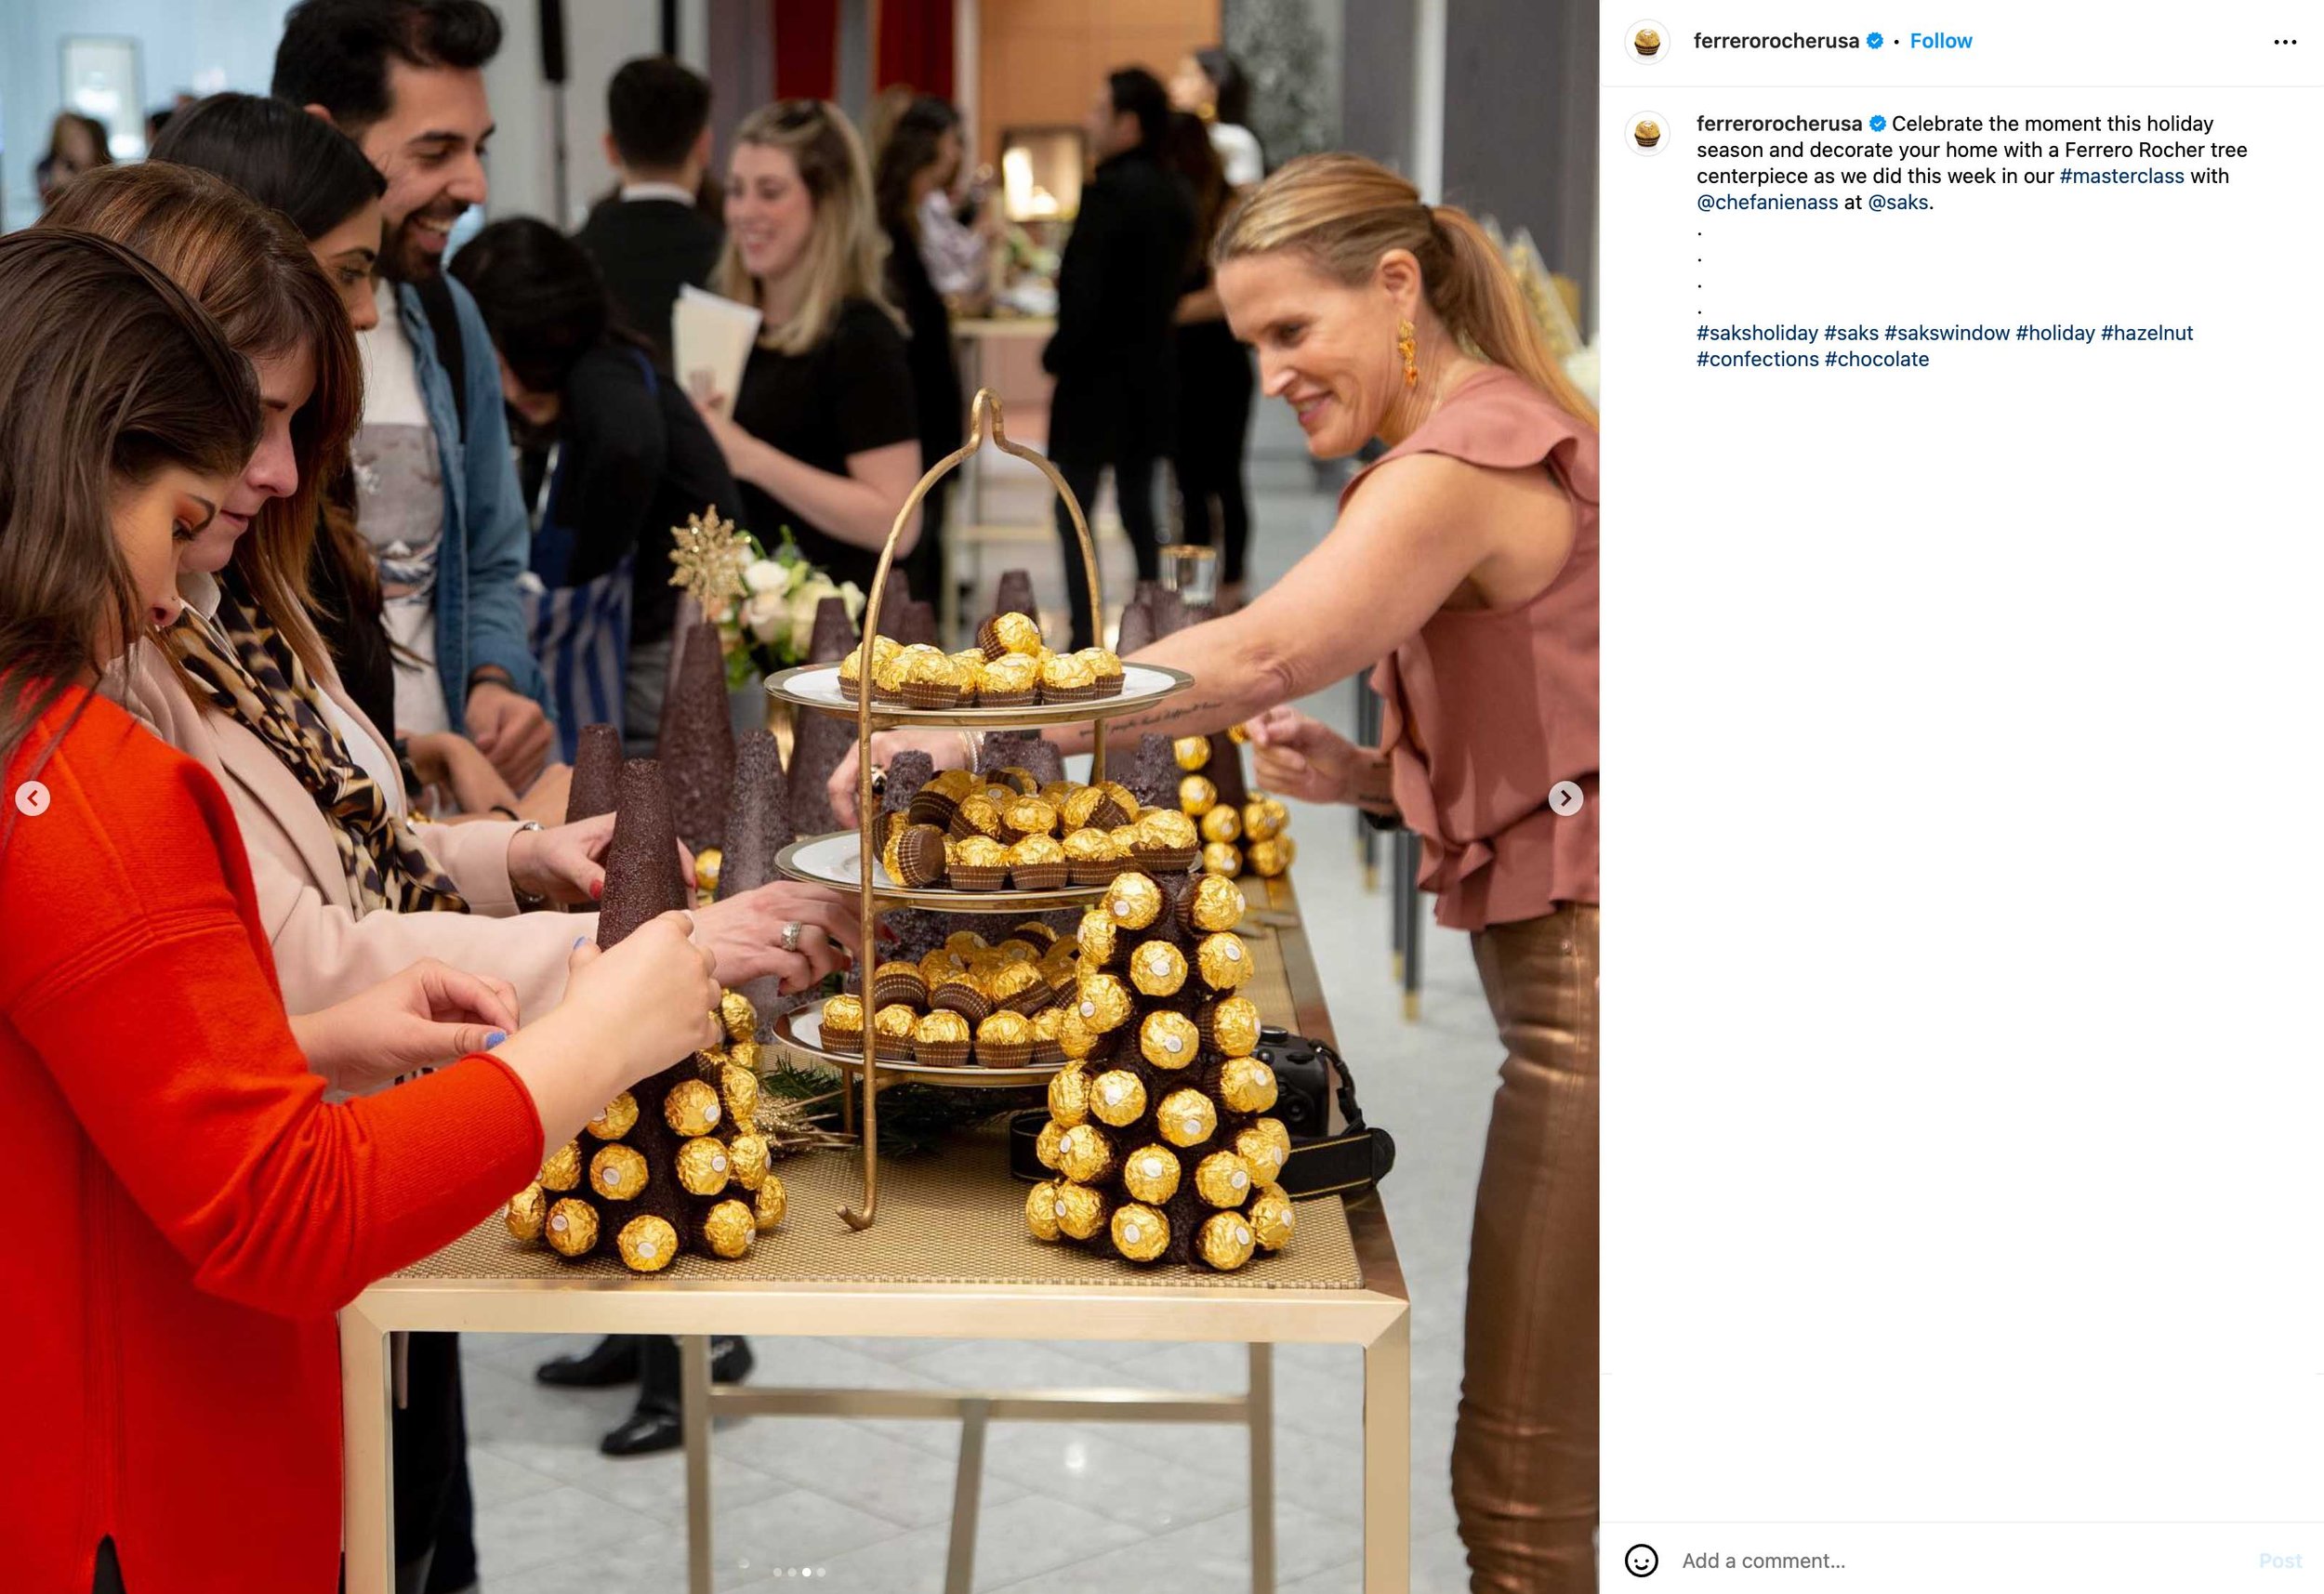  Ferrero Rocher partners with Saks Fifth Avenue and Influencer, Chefanie, for a Master Class in Ferrero Rocher holiday centerpieces, publishing the event to their social media platforms, New York, NY 